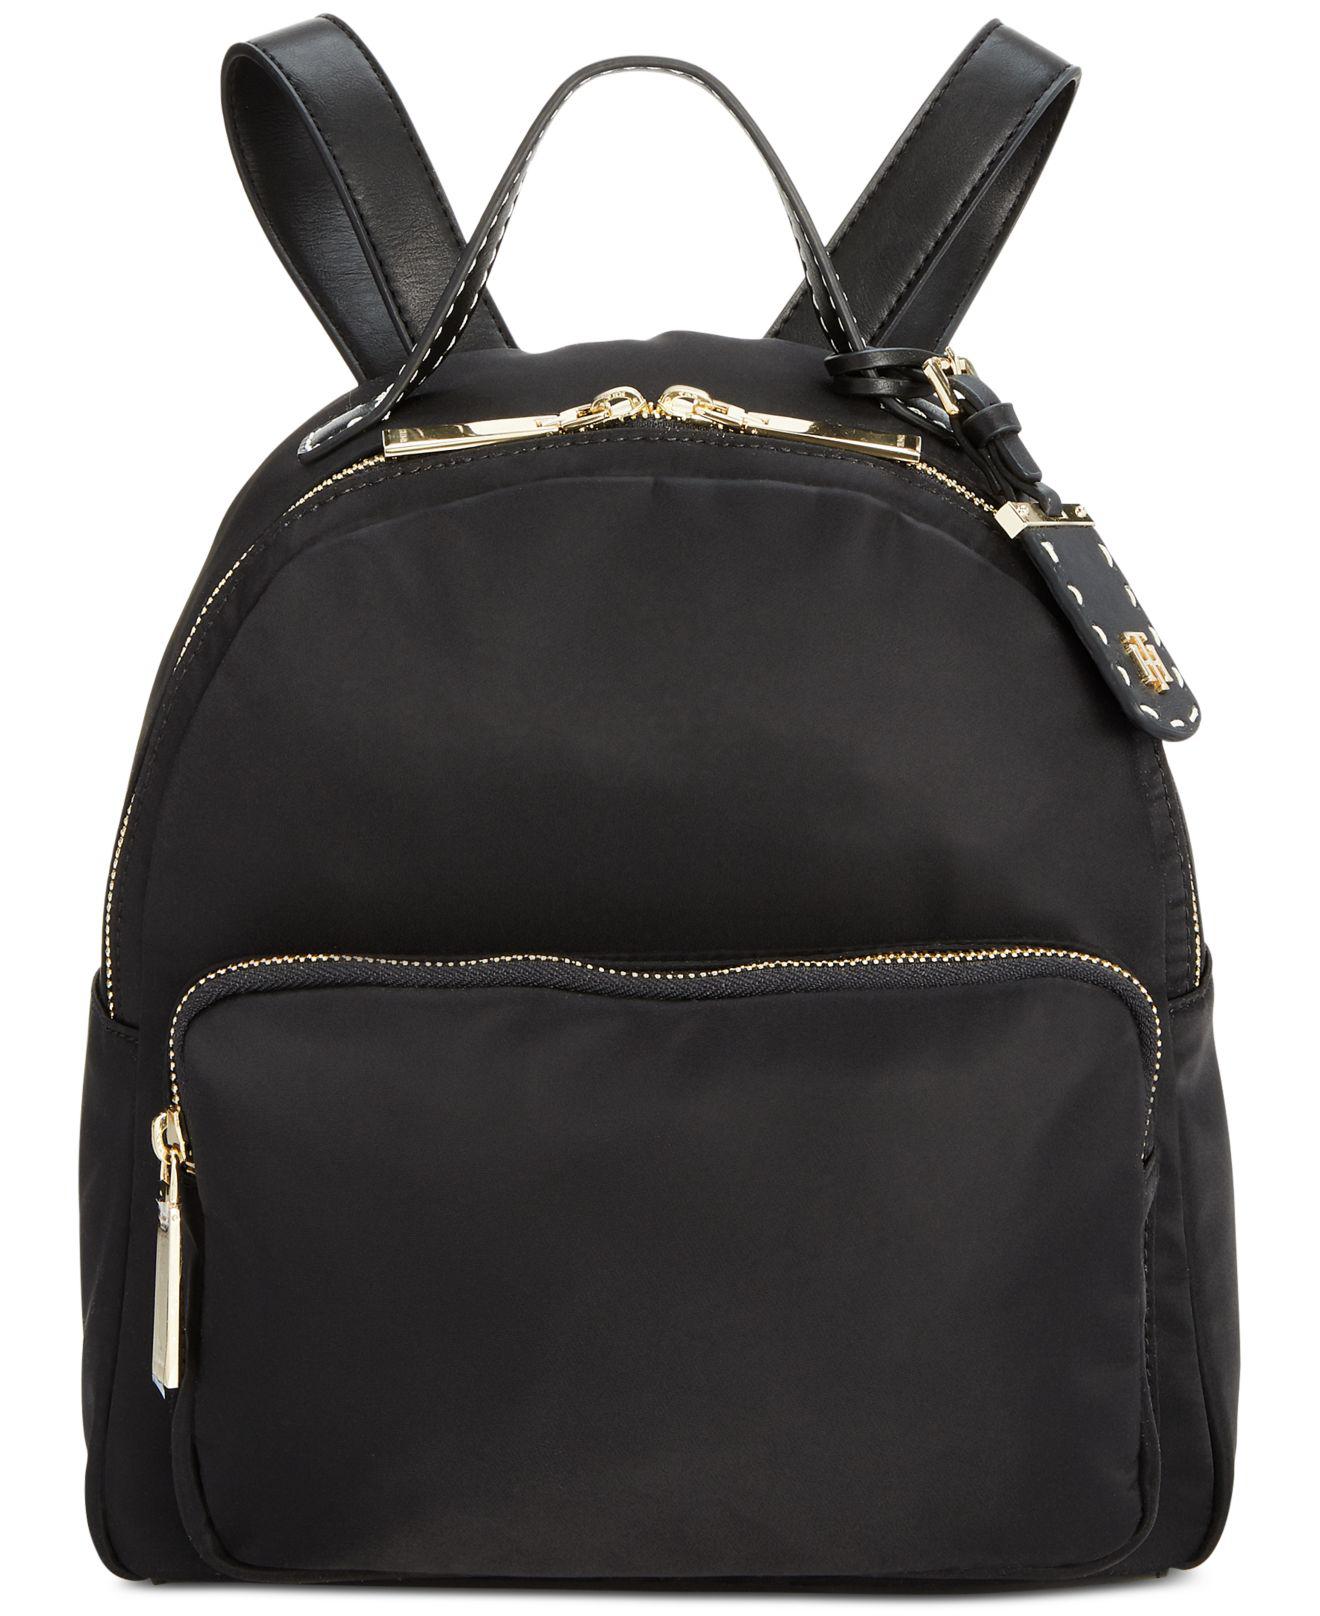 Tommy Hilfiger Julia Small Dome Backpack in Black/Gold (Black) - Lyst